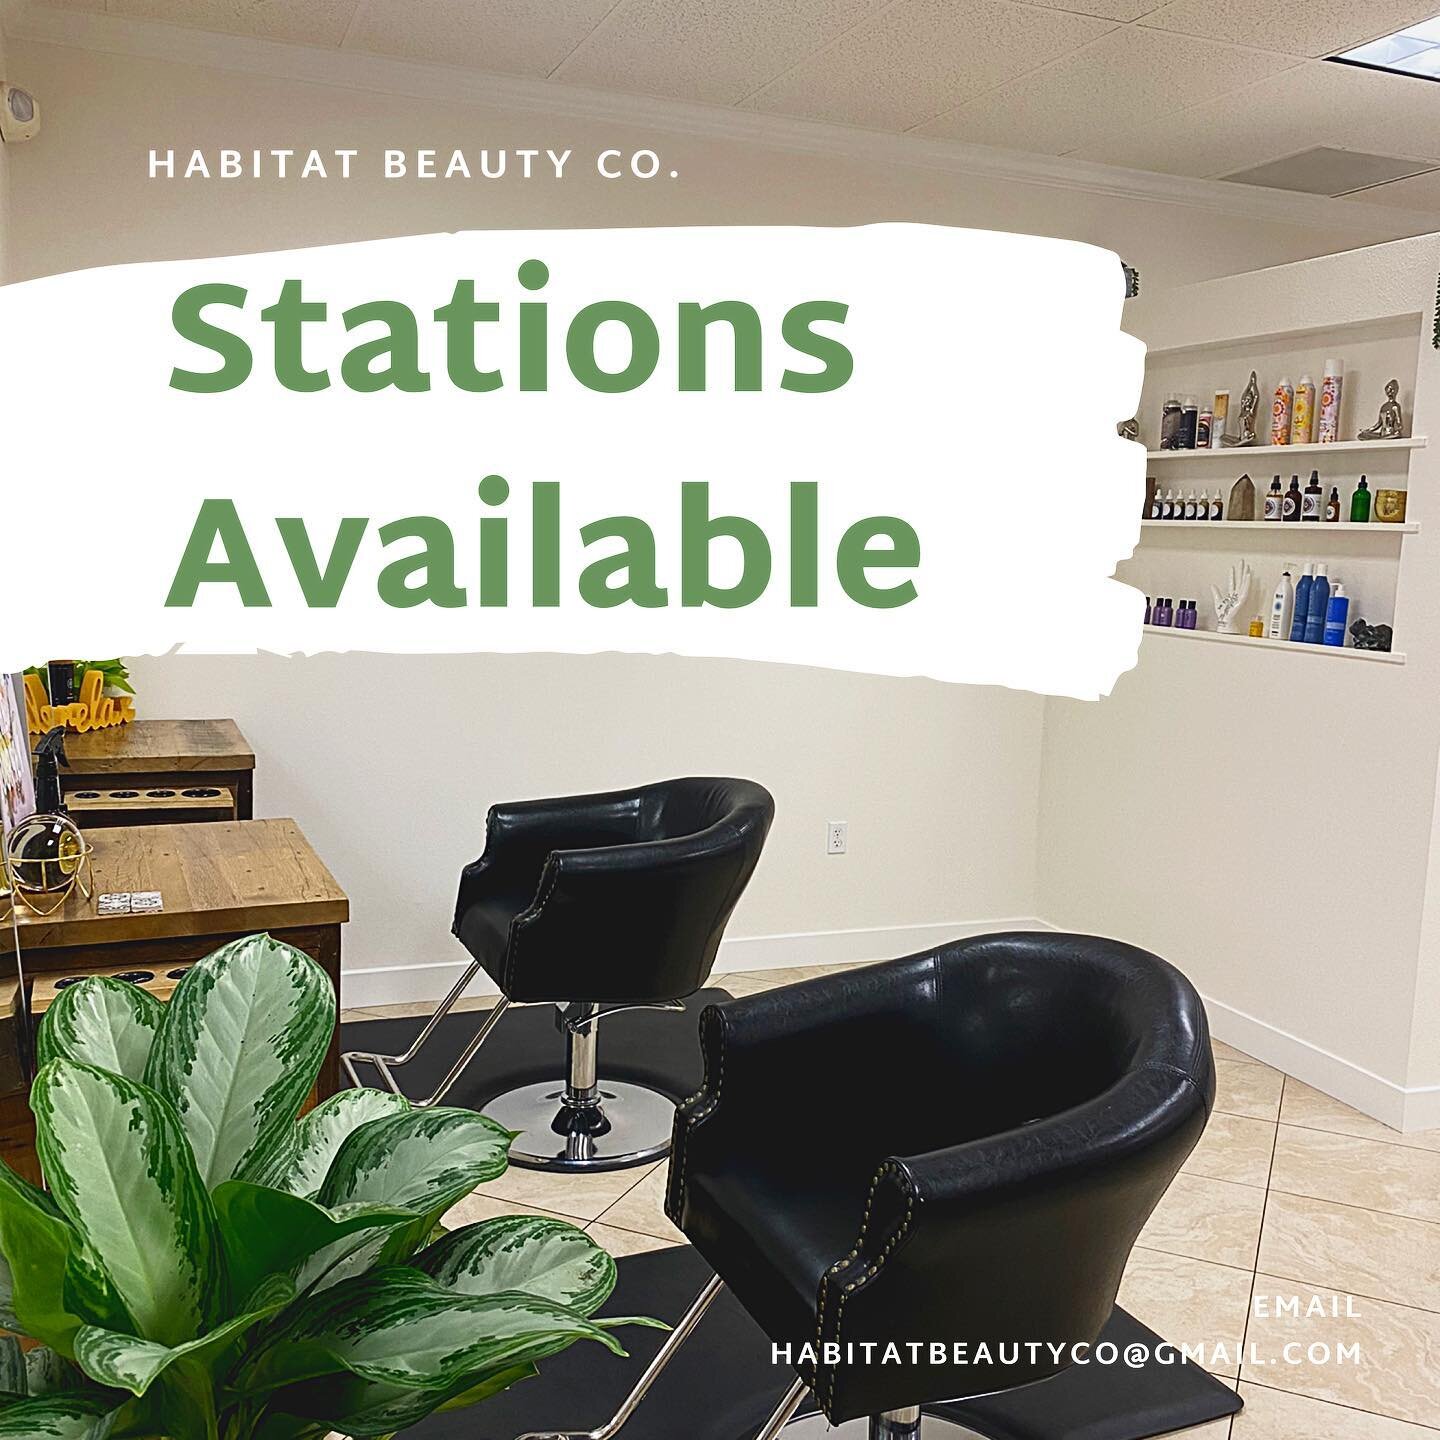 If you are looking to work in a space dedicated to supporting its stylist their guest and the community , DM or email me to set up a time we can chat about what Habitat Beauty Co. is all about! 
Habitatbeautyco@gmail.com &bull;&bull;&bull;&bull;&bull